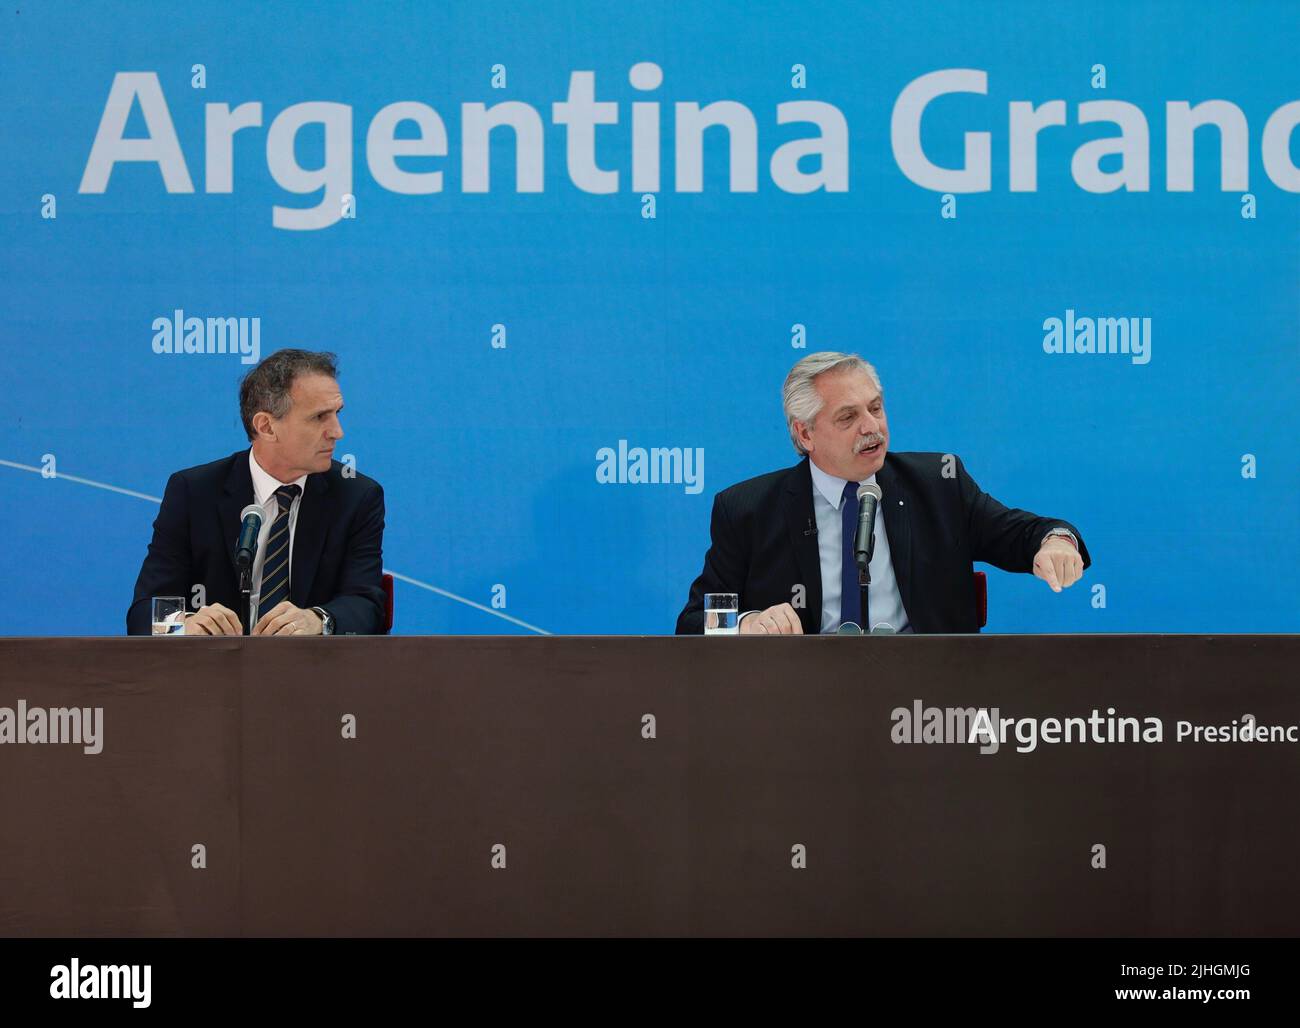 Buenos Aires, 18th July 2022. President Alberto Fernández led the presentation of Argentina Grande, Infrastructure Plan for the Development of the Nation, together with the Minister of Public Works, Gabriel Katopodis. (Credit: Esteban Osorio/Alamy Live News) Stock Photo